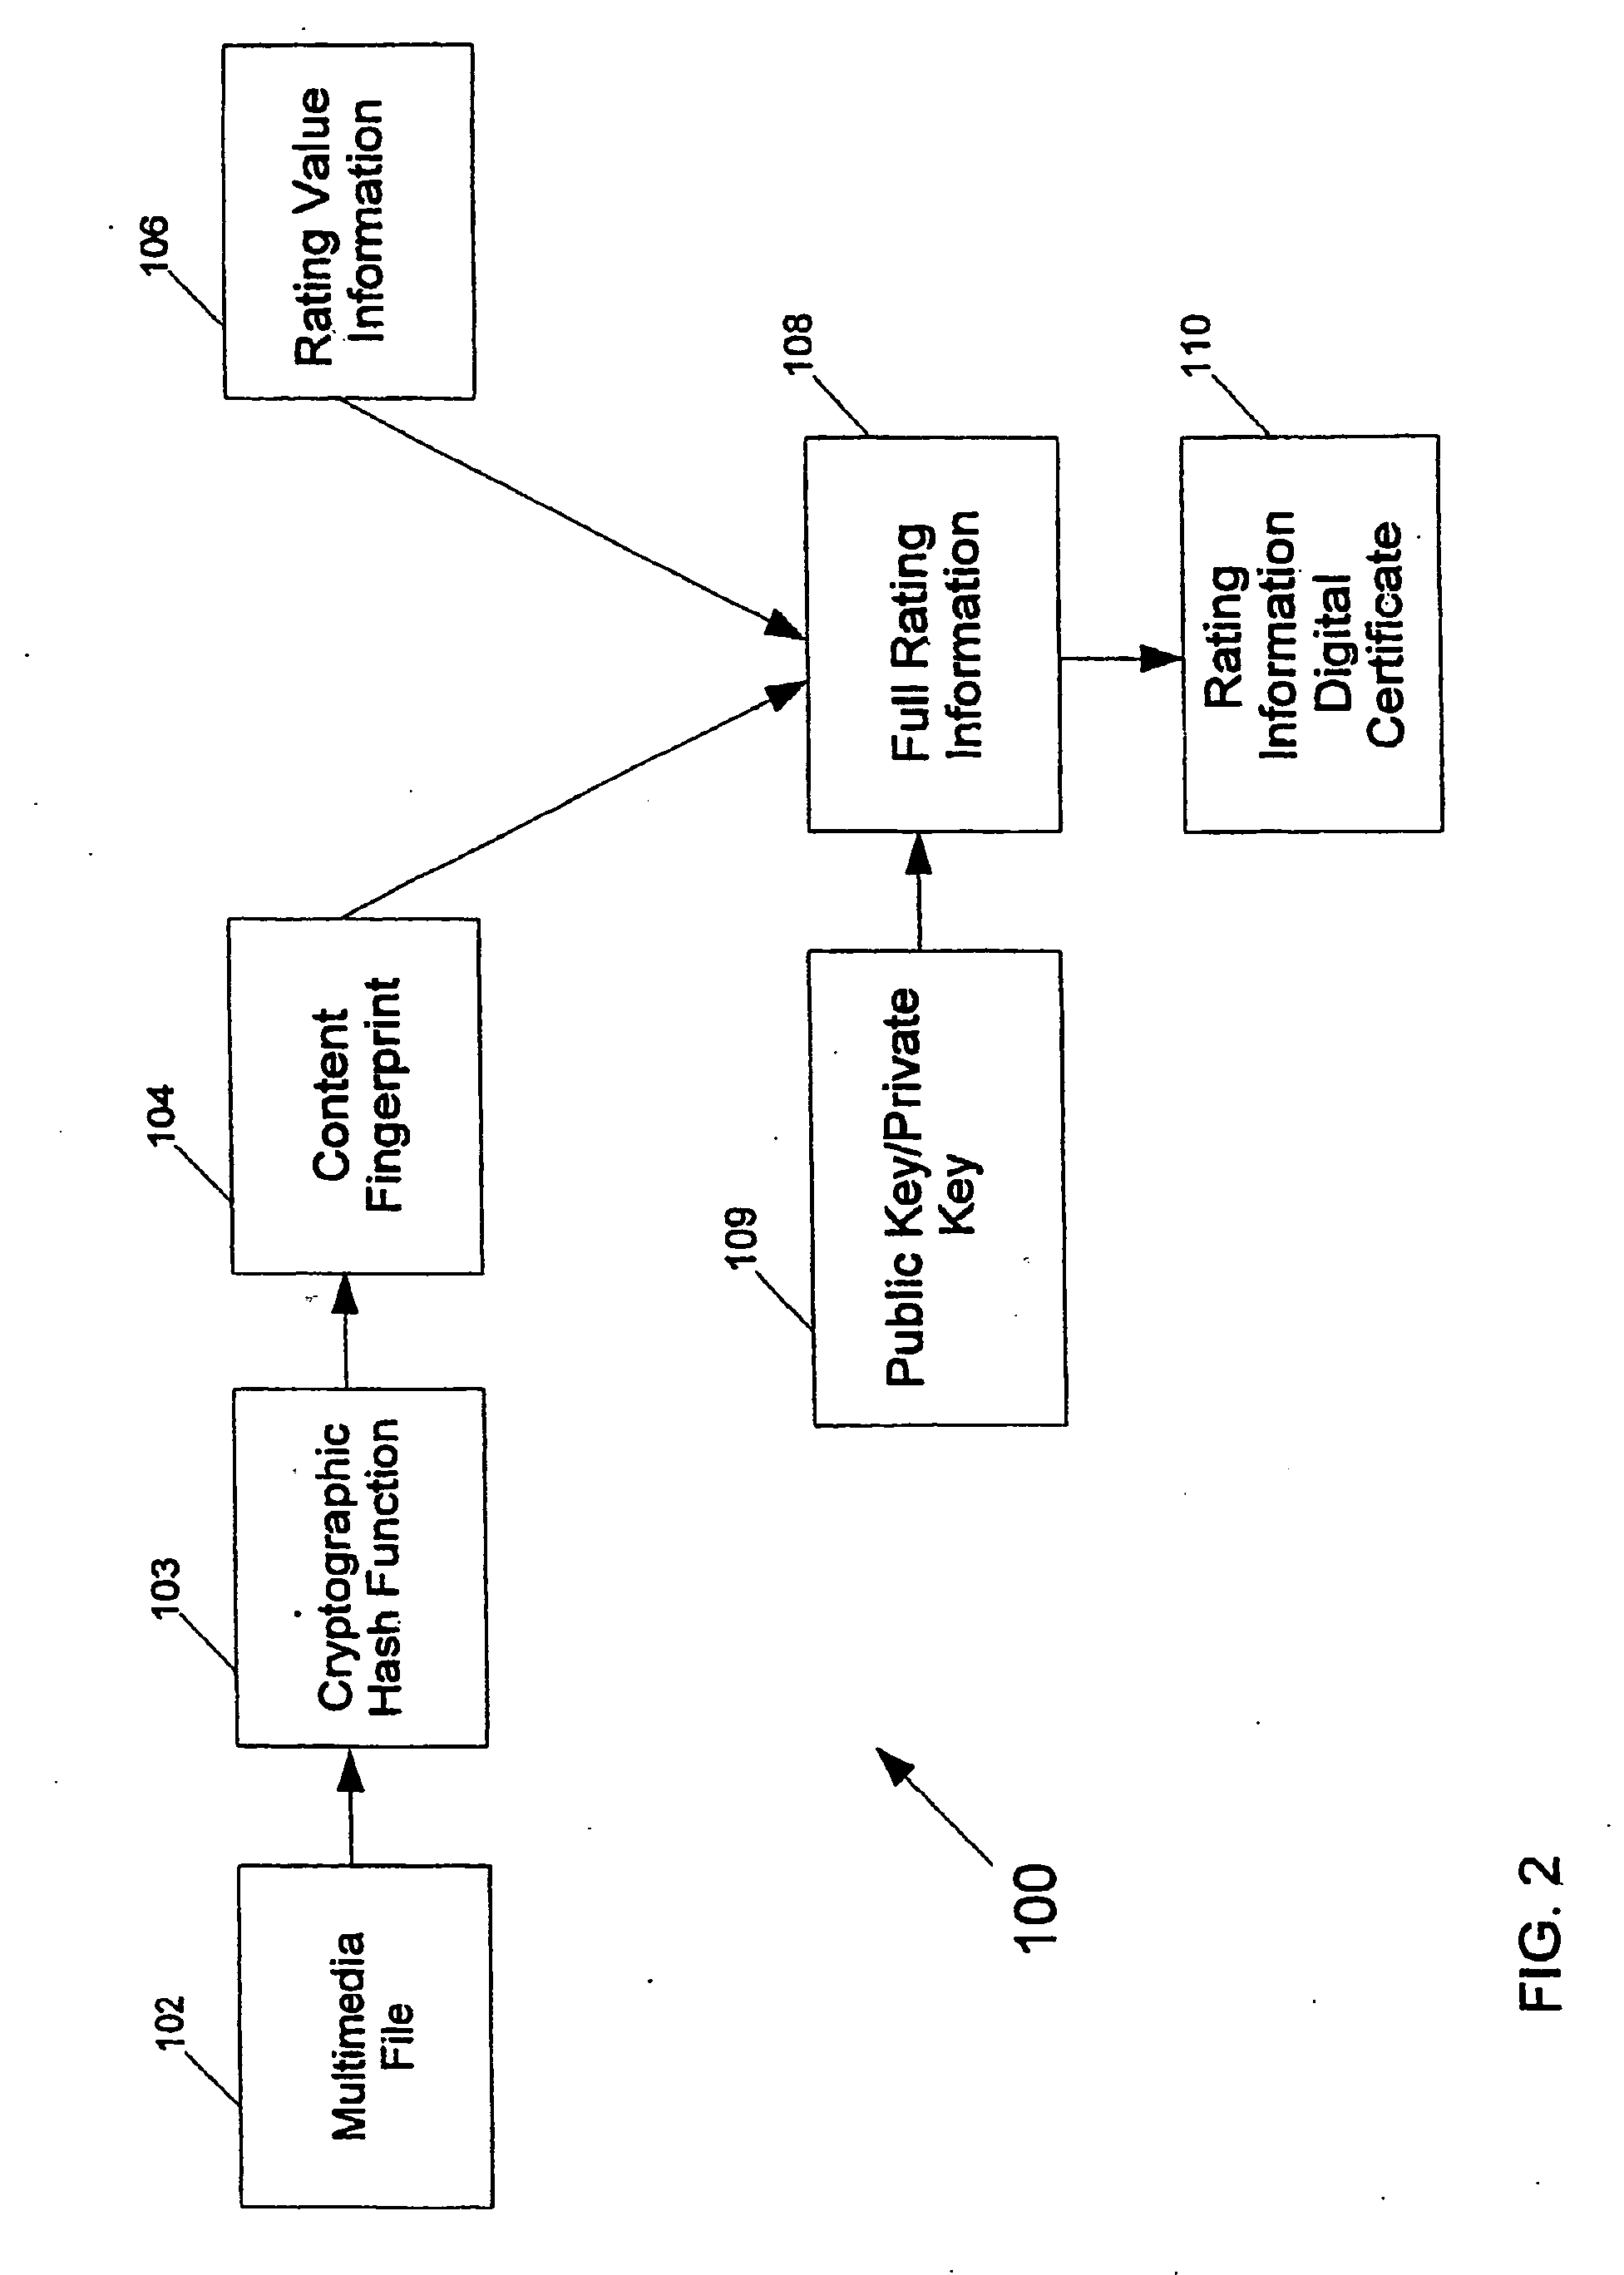 System and method for securing content ratings